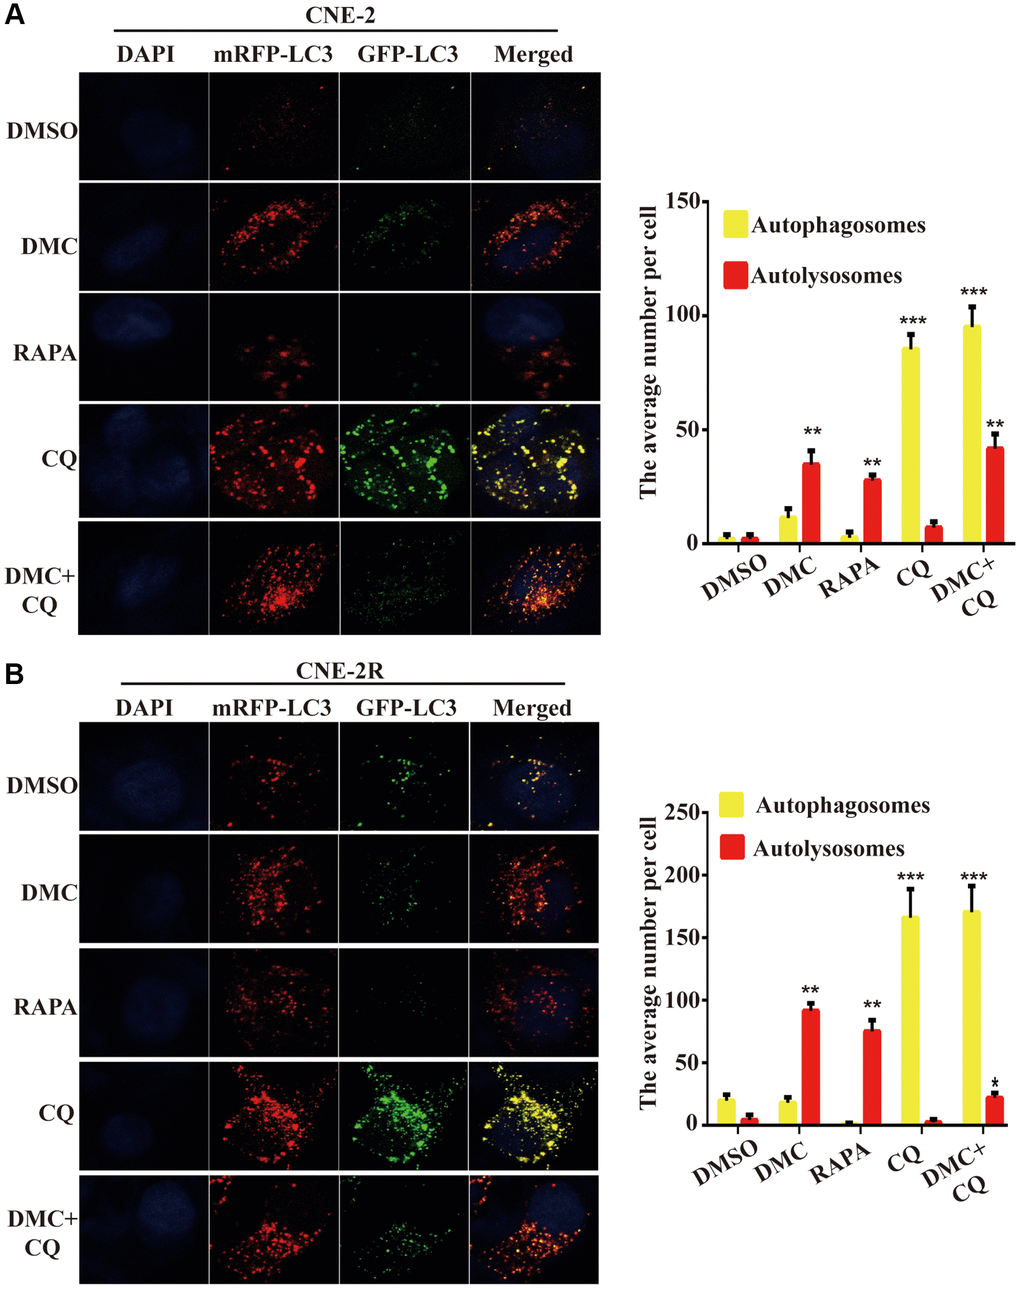 DMC induced autophagic flux in NPC cells. (A) Fluorescence photographs of CNE-2 and (B) CNE-2R cells transfected with mRFP-GFP-LC3B reporter. Cells were treated with 0.1% DMSO, 20 μM DMC, 10 μM RAPA, 20 μM CQ or DMC+CQ for 4 h. CQ-treated cells were used as positive controls. Nuclei were stained with DAPI. Scale bar: 10 μm. Average numbers of autophagosomes (yellow puncta) and autolysosomes (red puncta) per cell, and over 30 cells were counted in each condition. (n = 3; **P ***P 